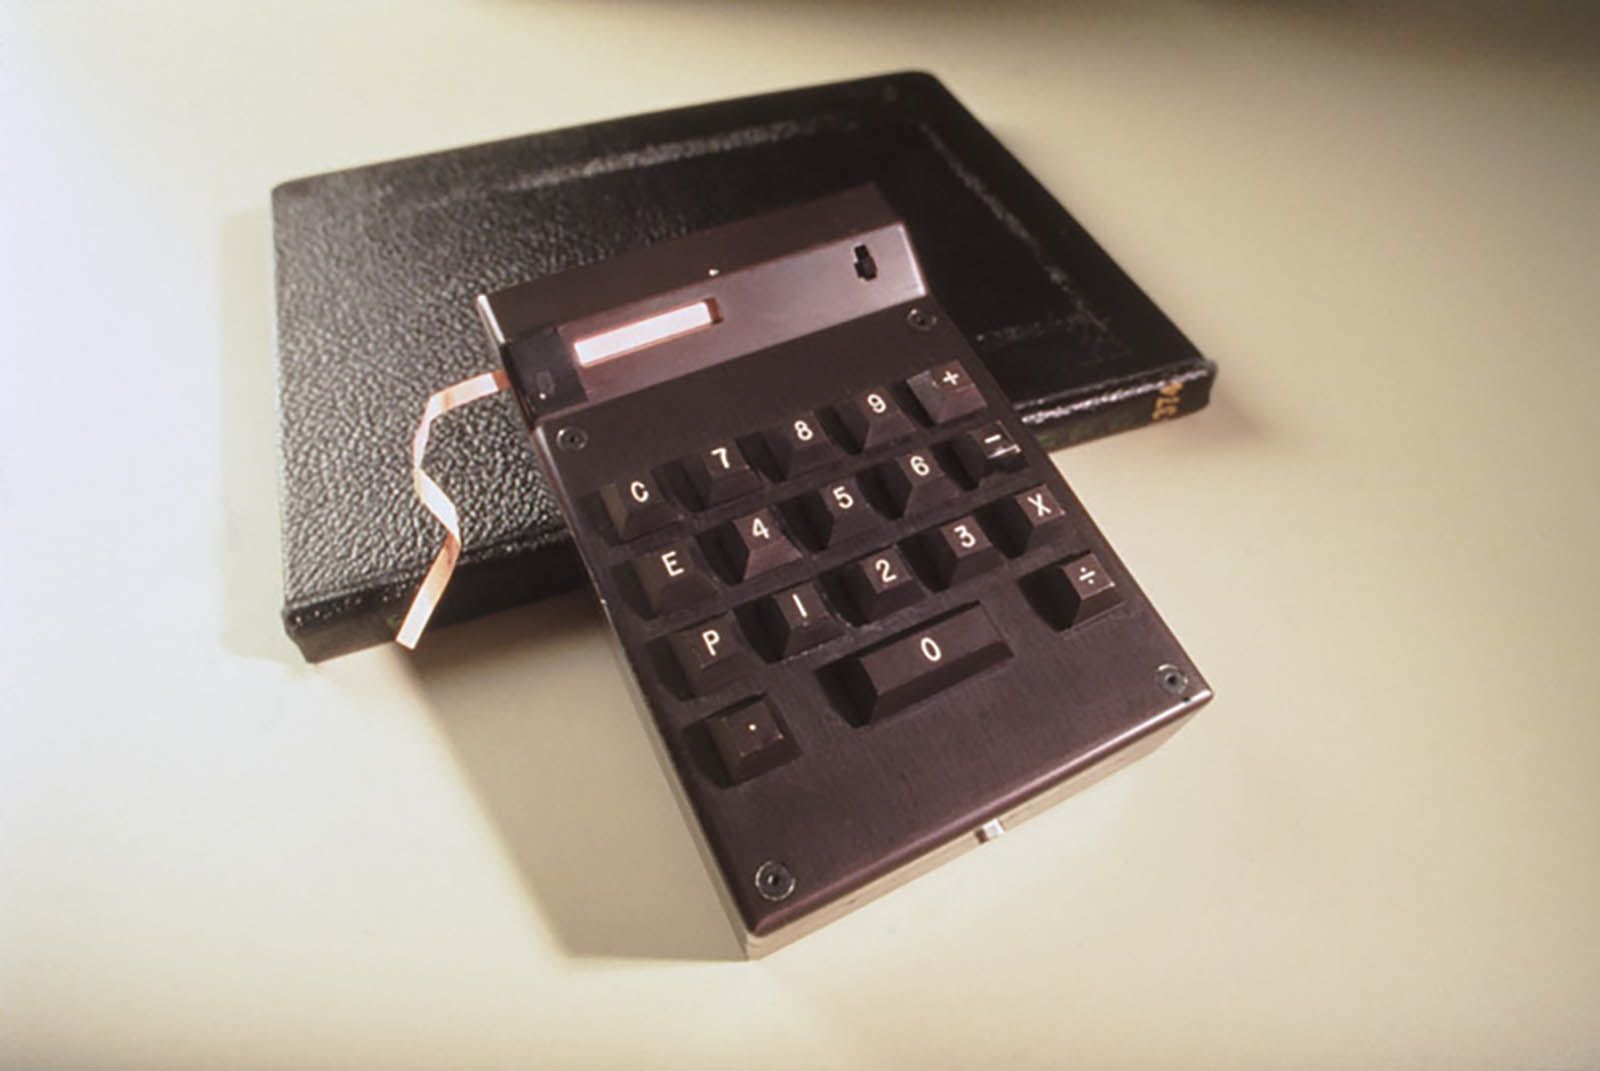 Jerry Merryman, the man who helped invent the hand-held calculator